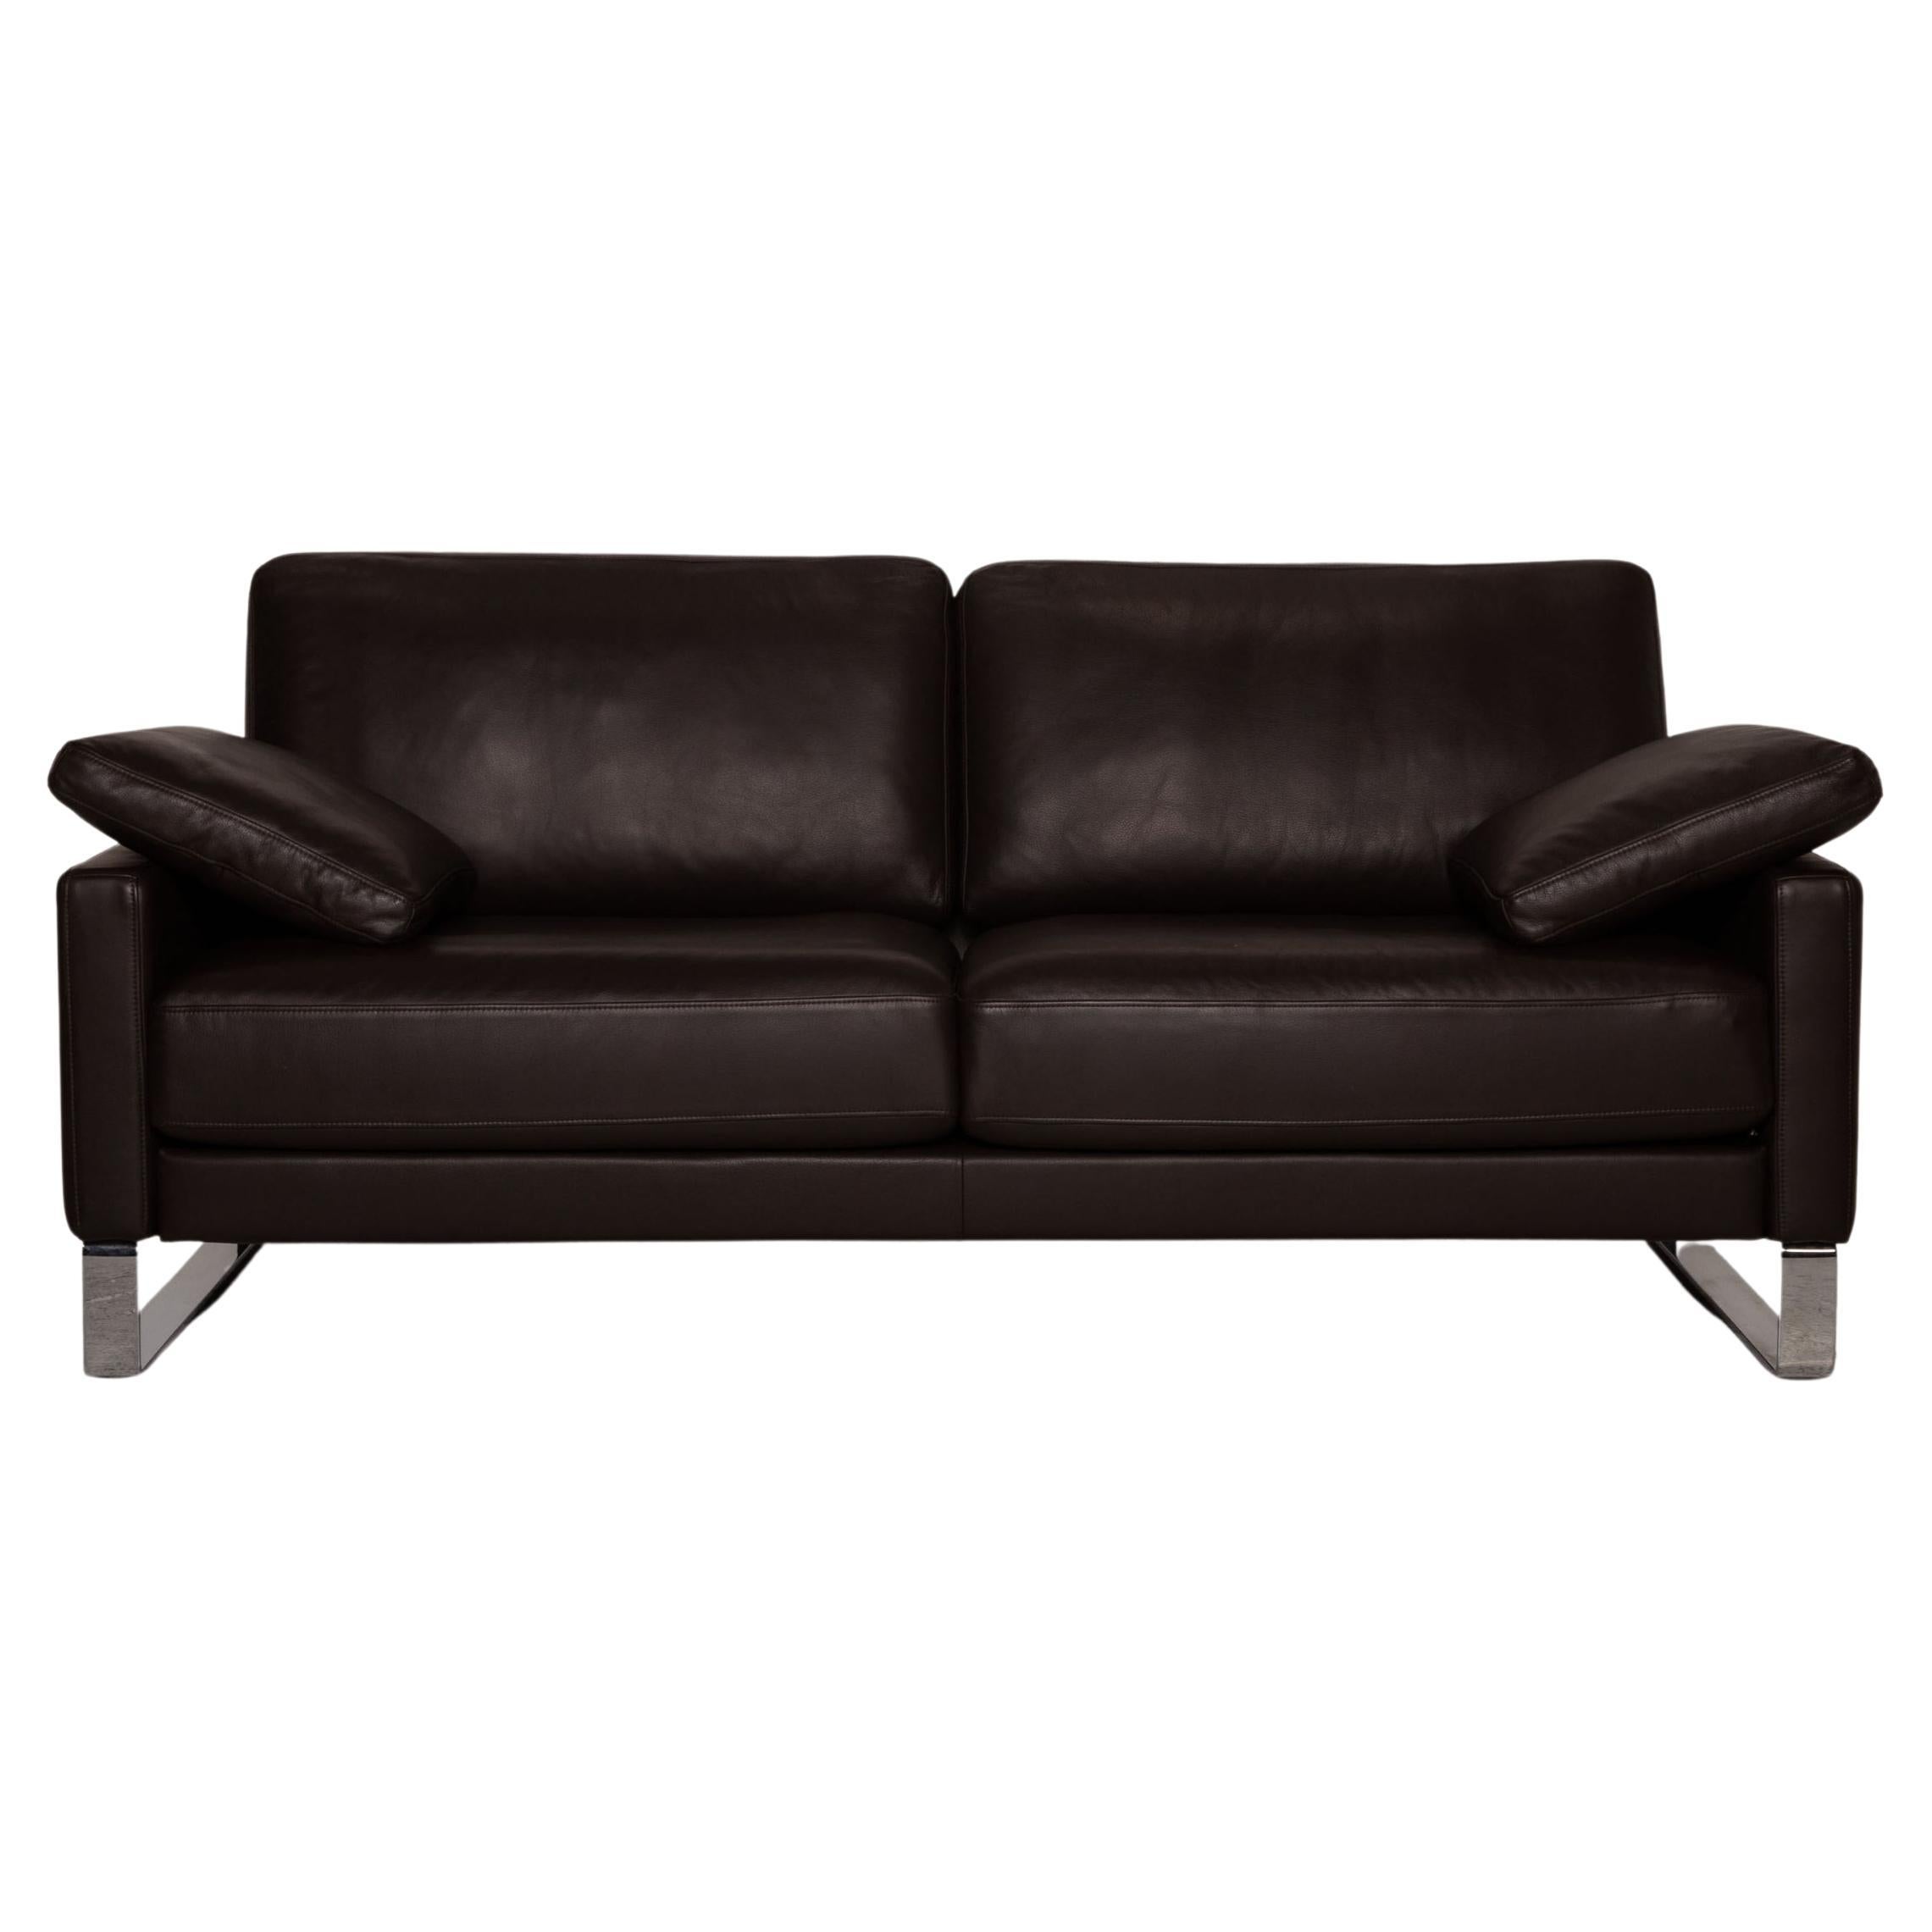 Rolf Benz Ego Leather Sofa Dark Brown Two-Seater Couch For Sale